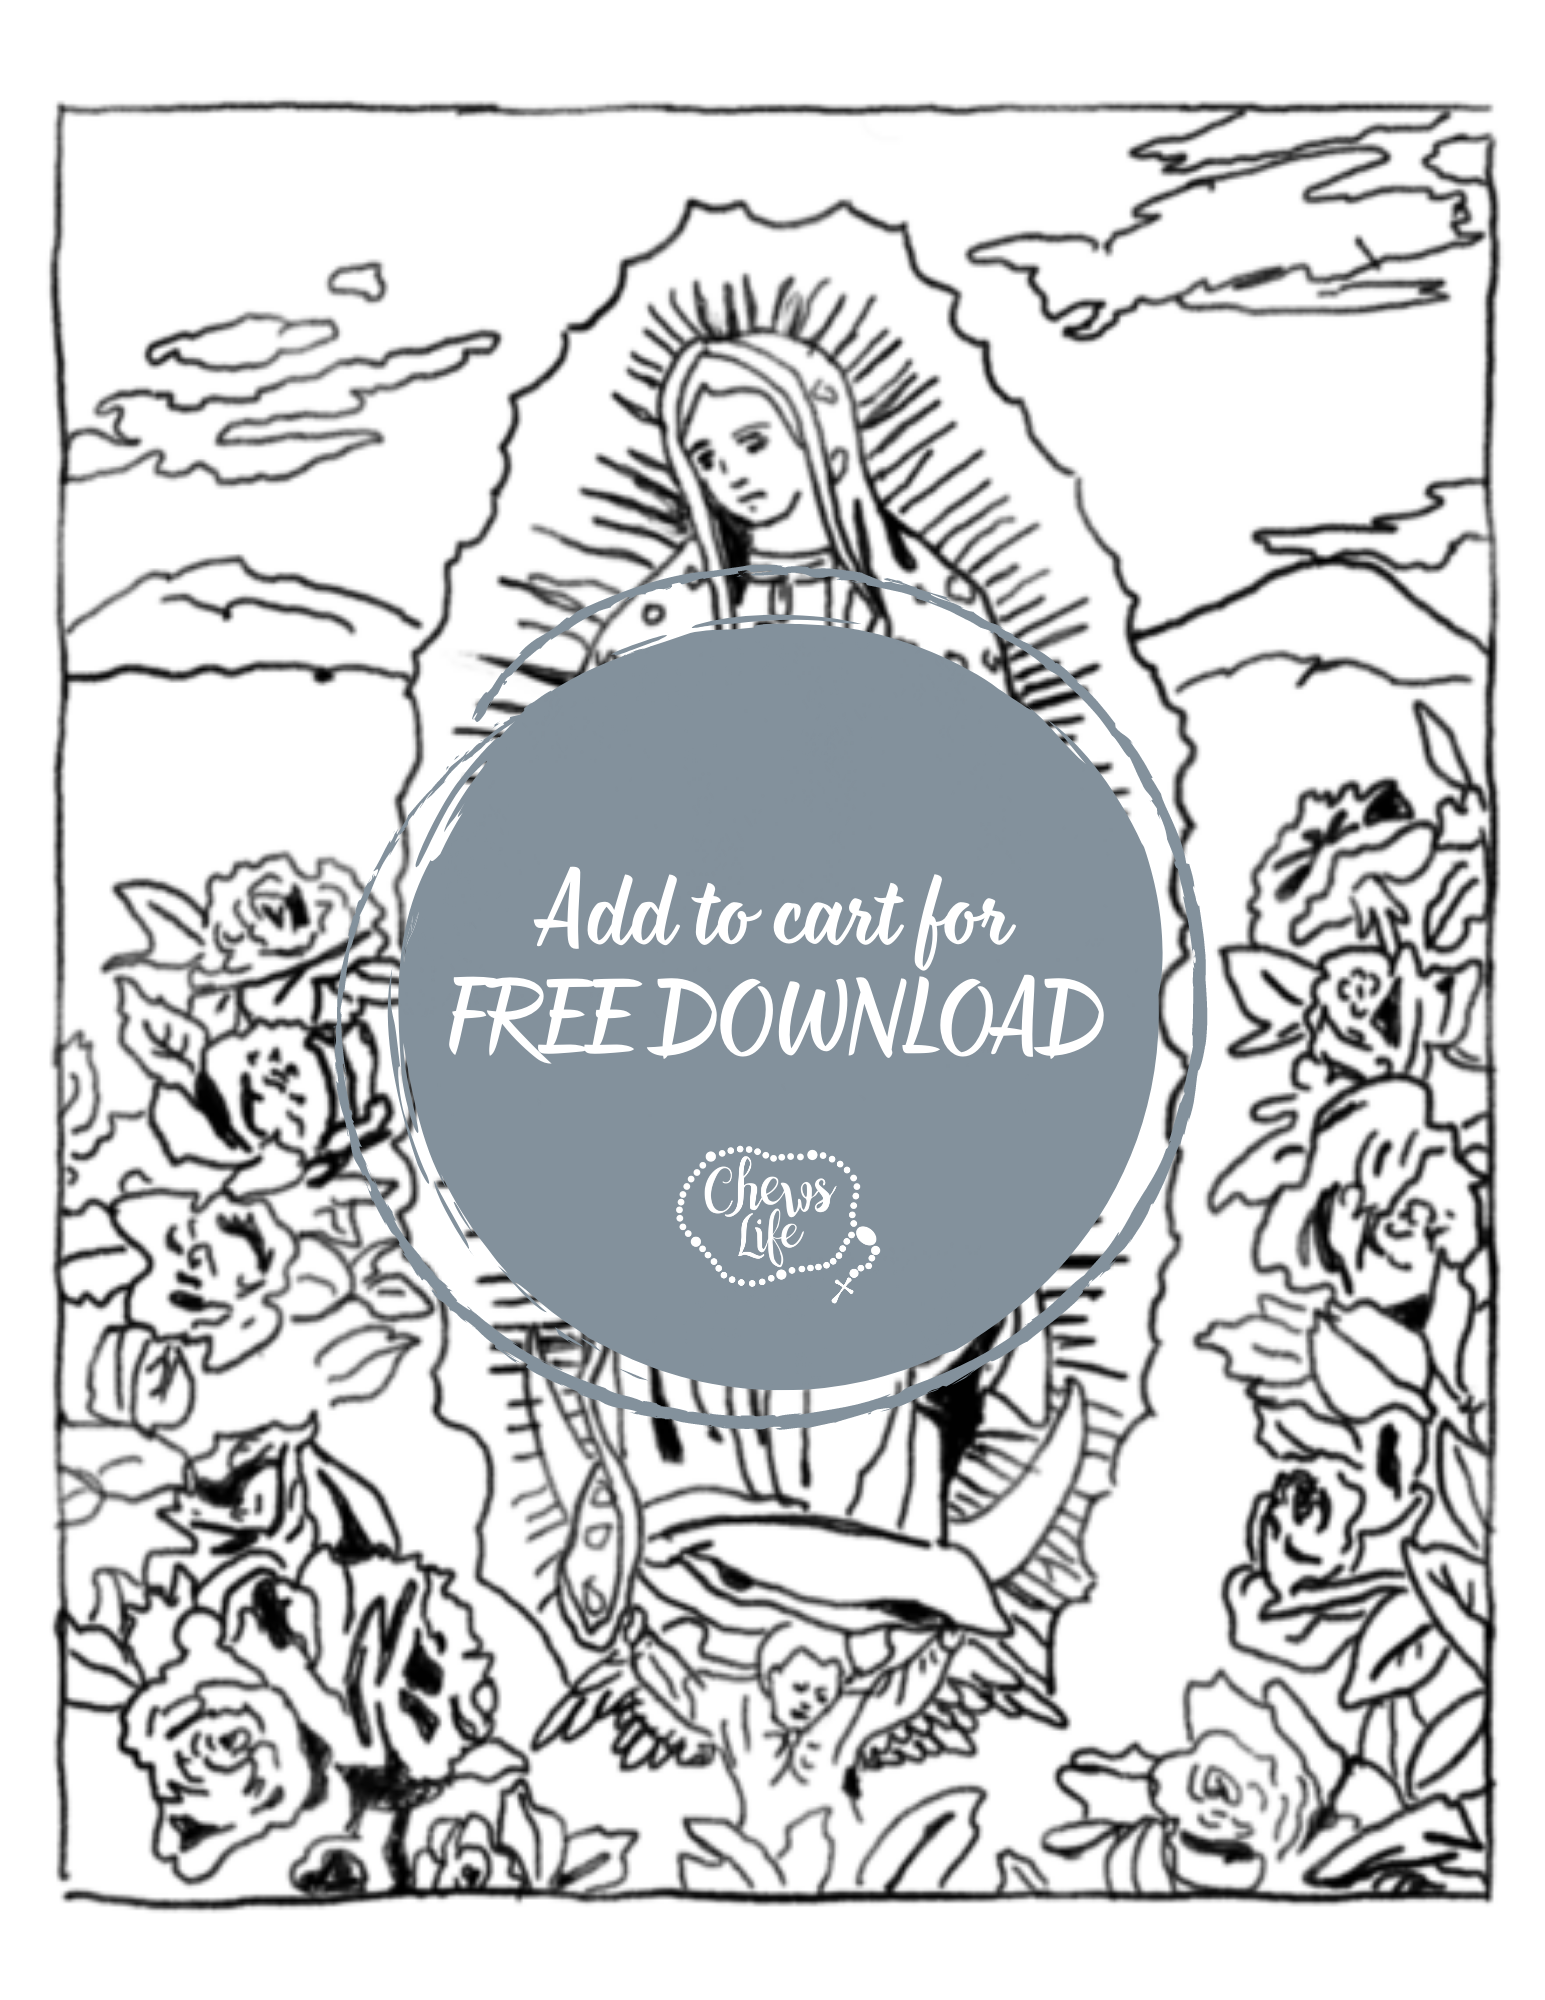 chews-life-our-lady-of-guadalupe-coloring-page-31349551333552.png